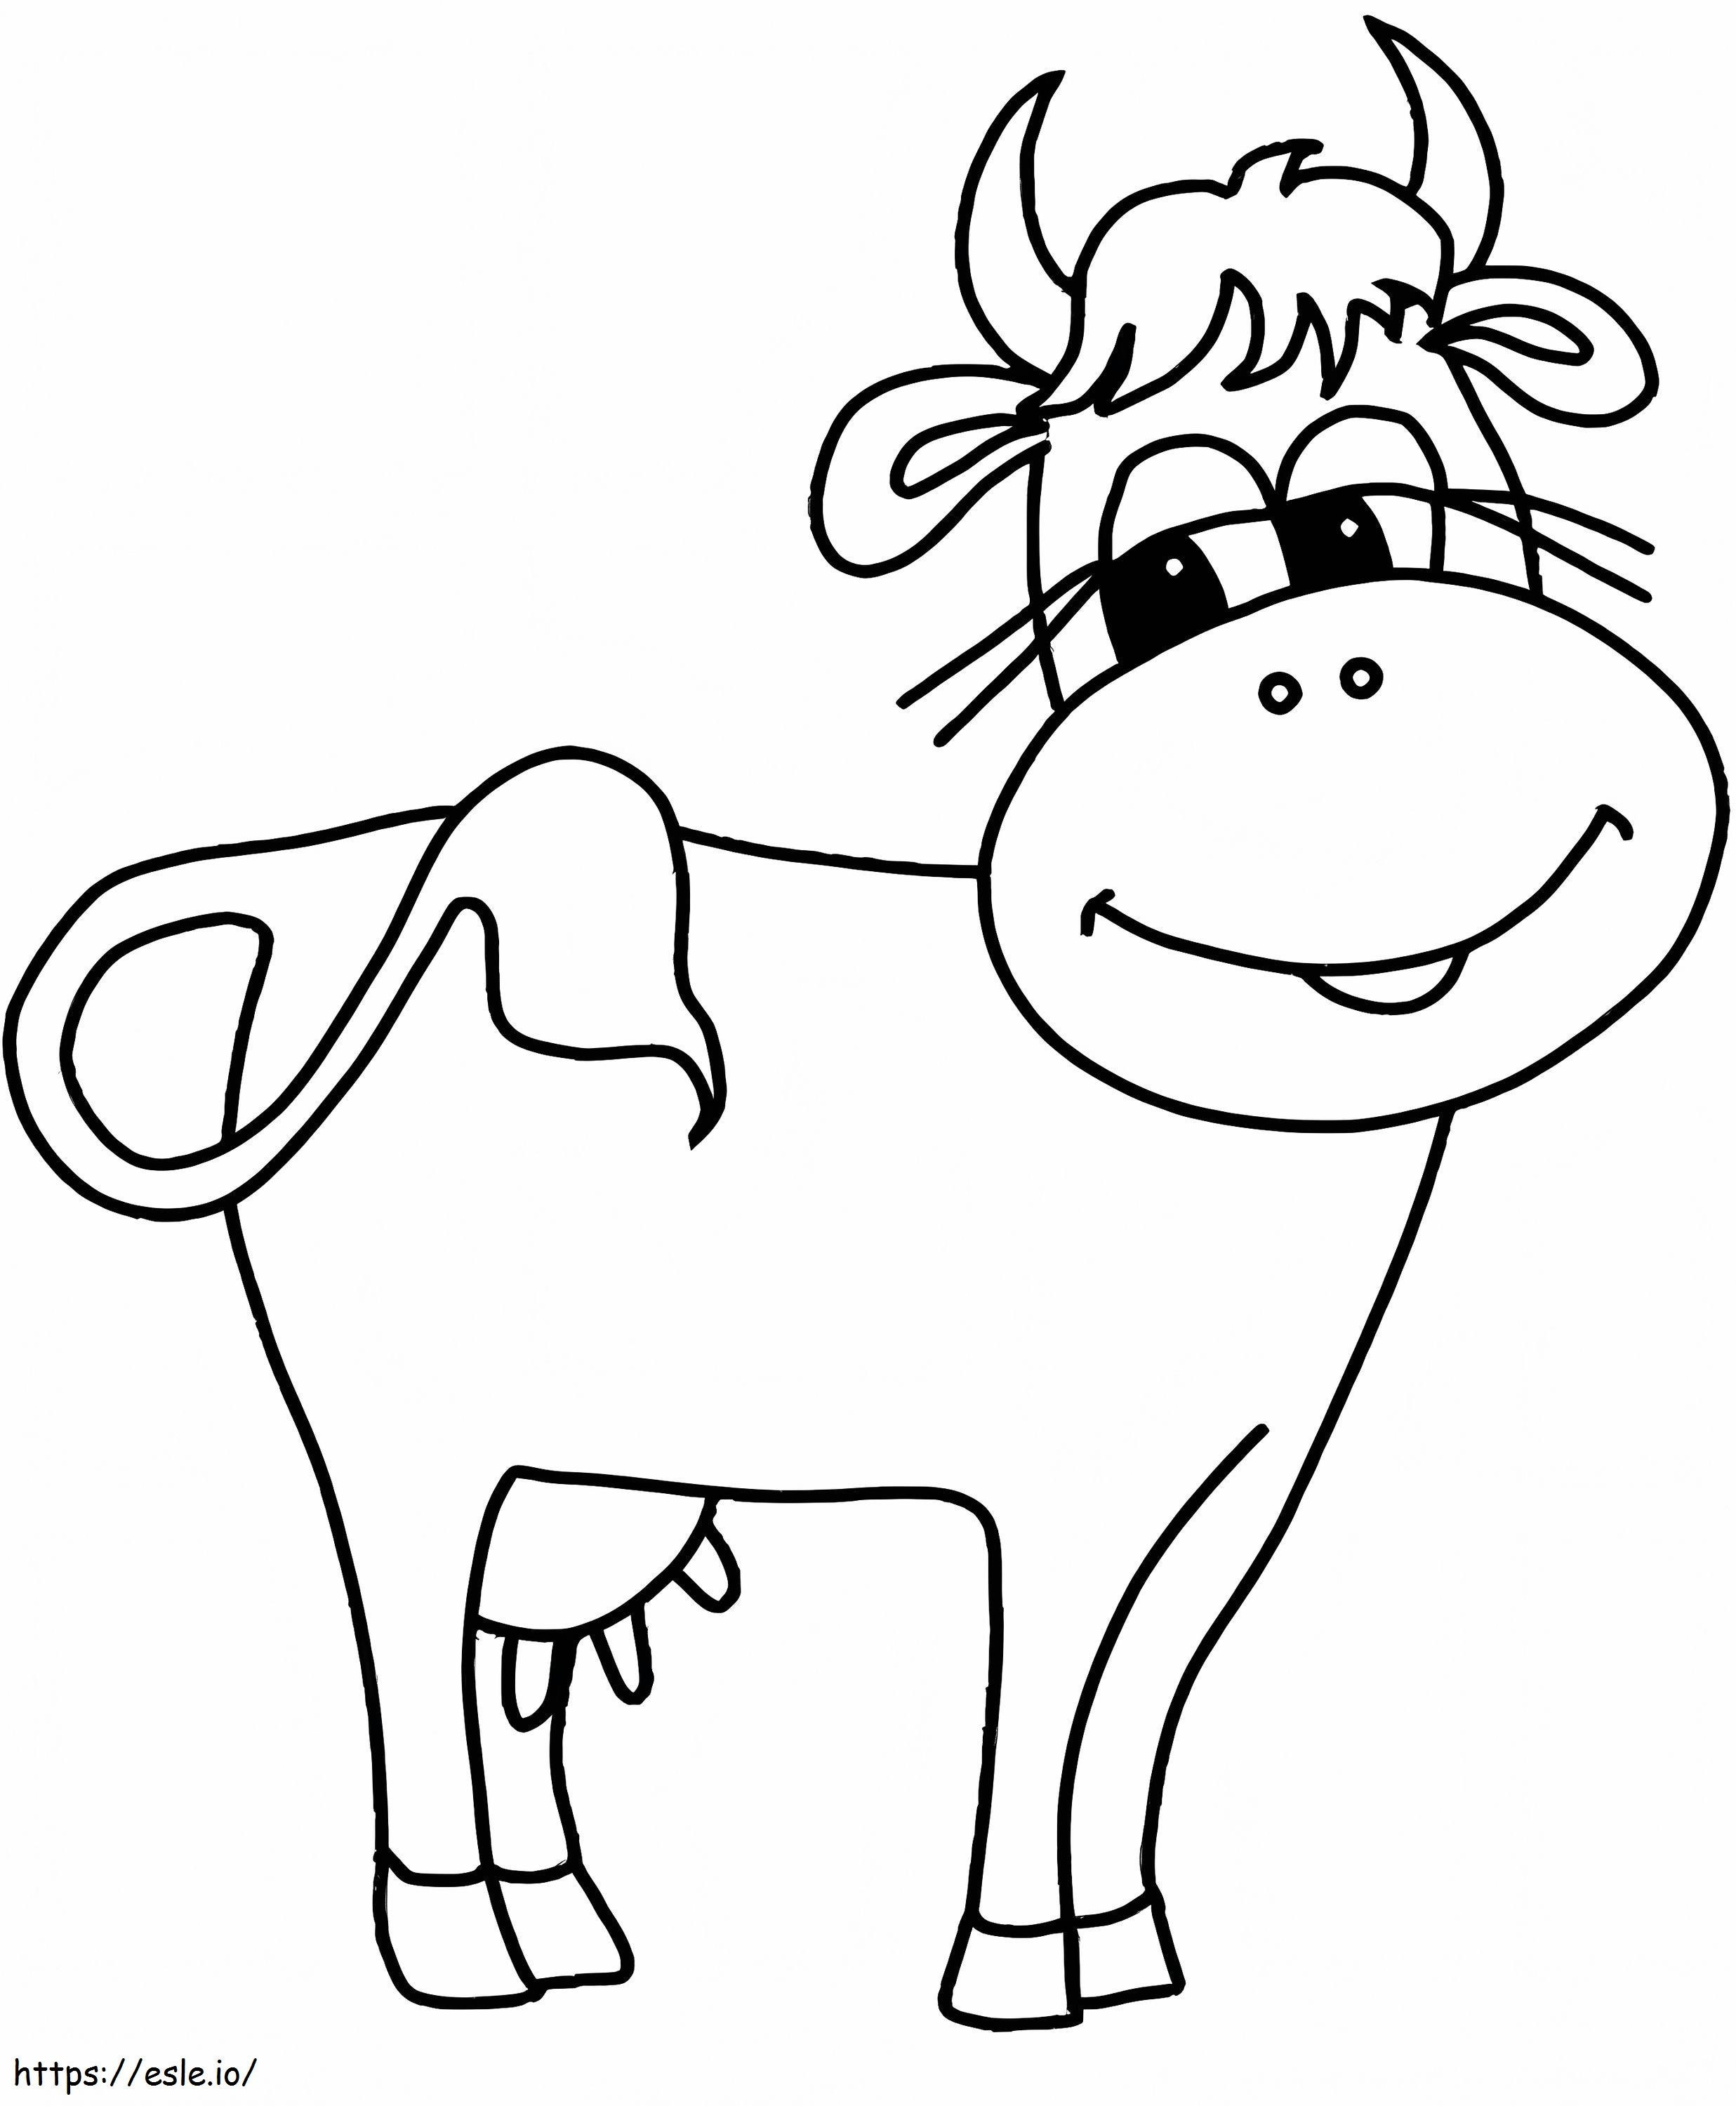 The Cow Is Smiling coloring page